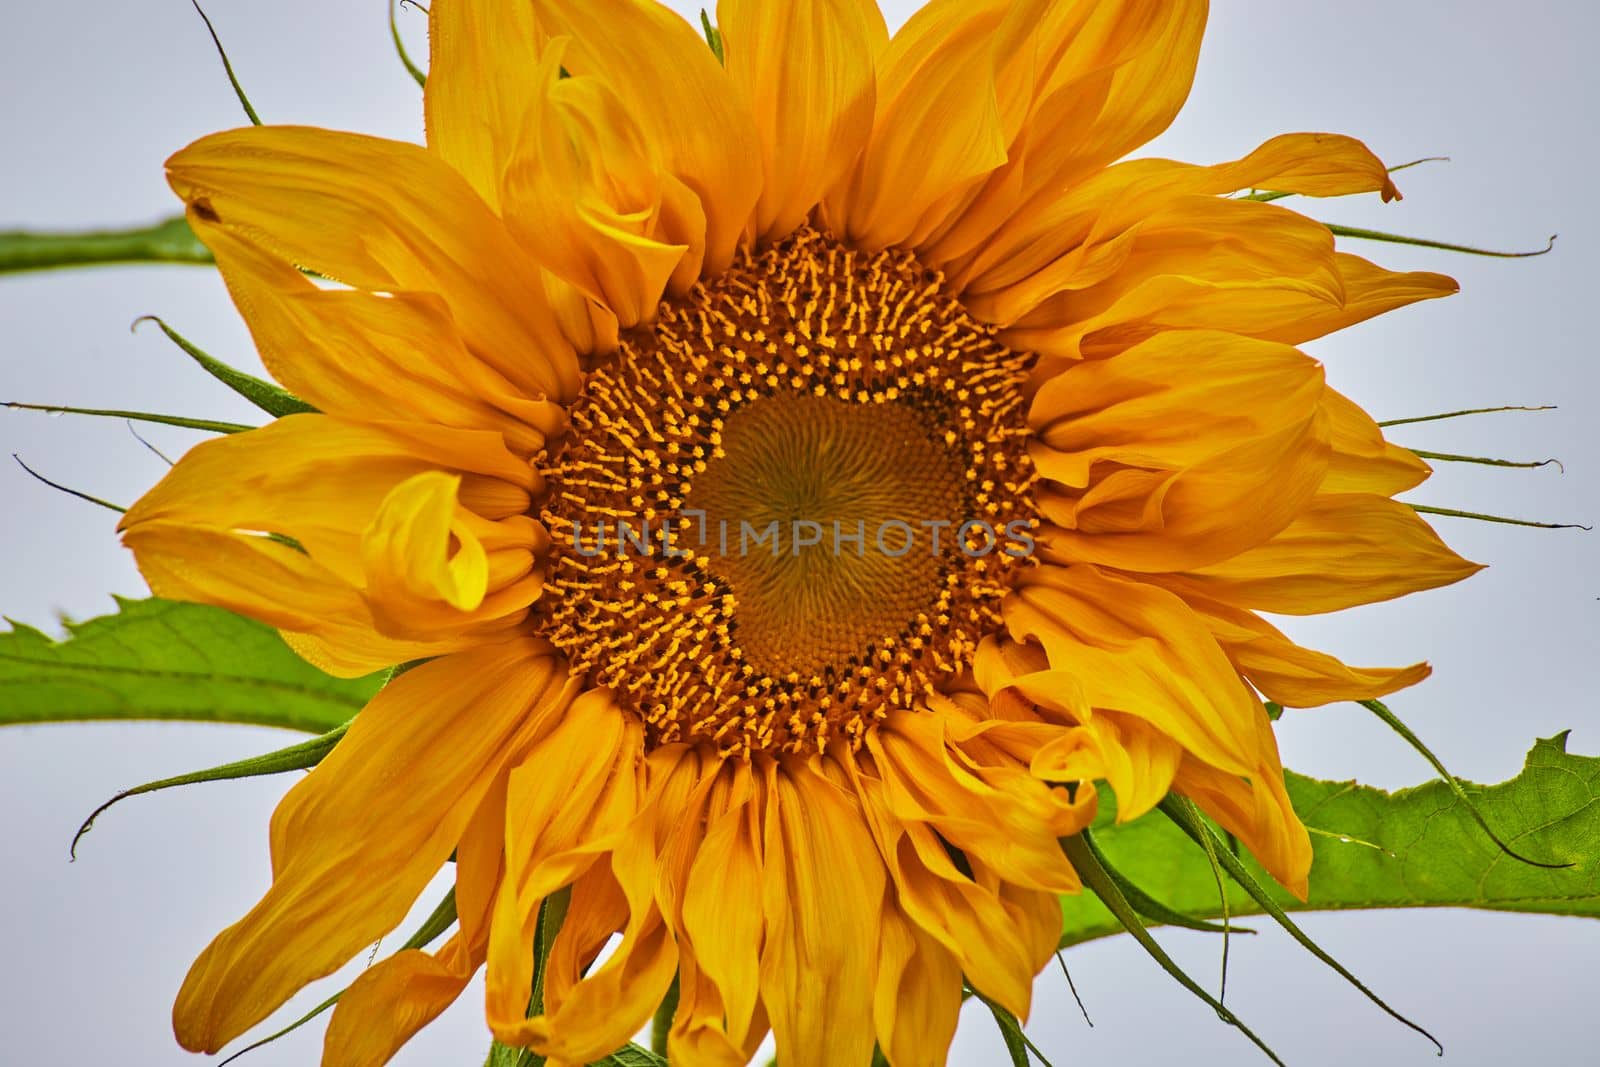 Image of Up close to sunflower in soft morning light with foggy background